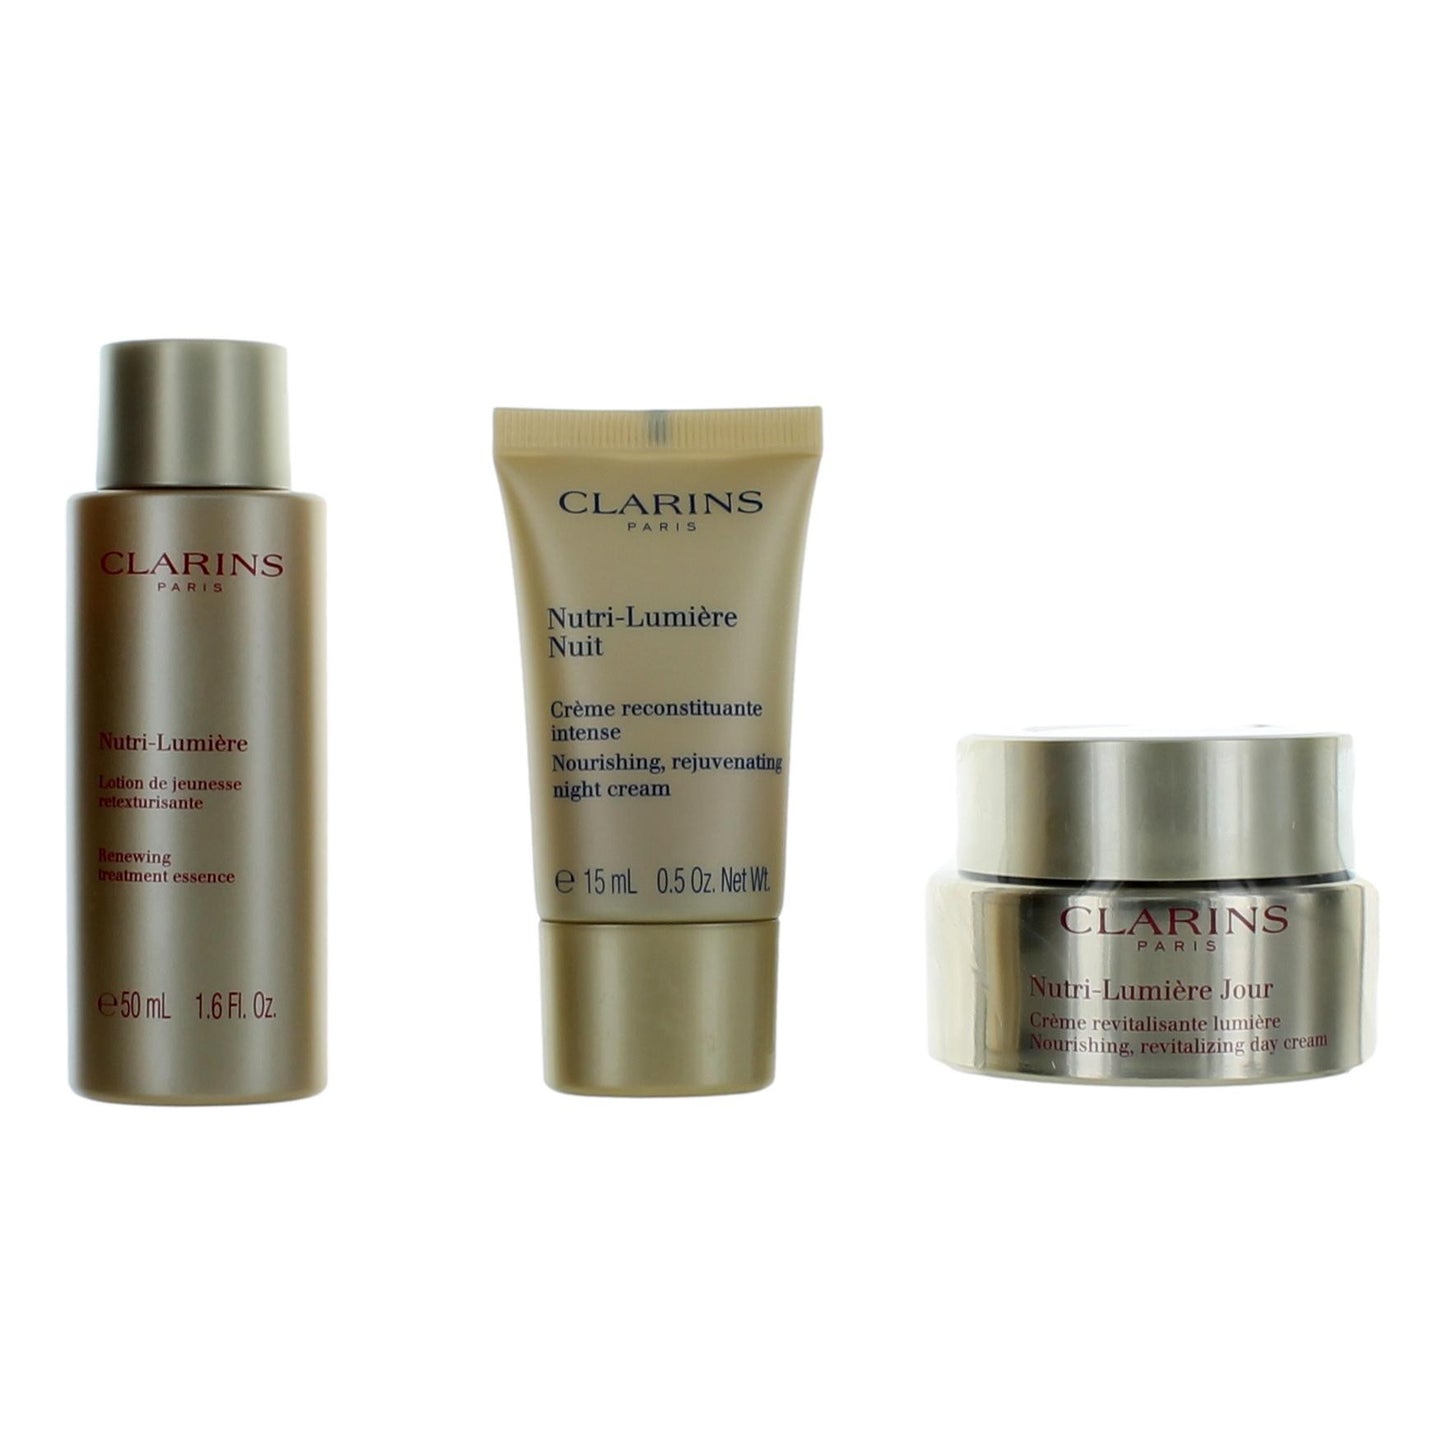 Clarins by Clarins, 3 Piece Essential Care Gift Set